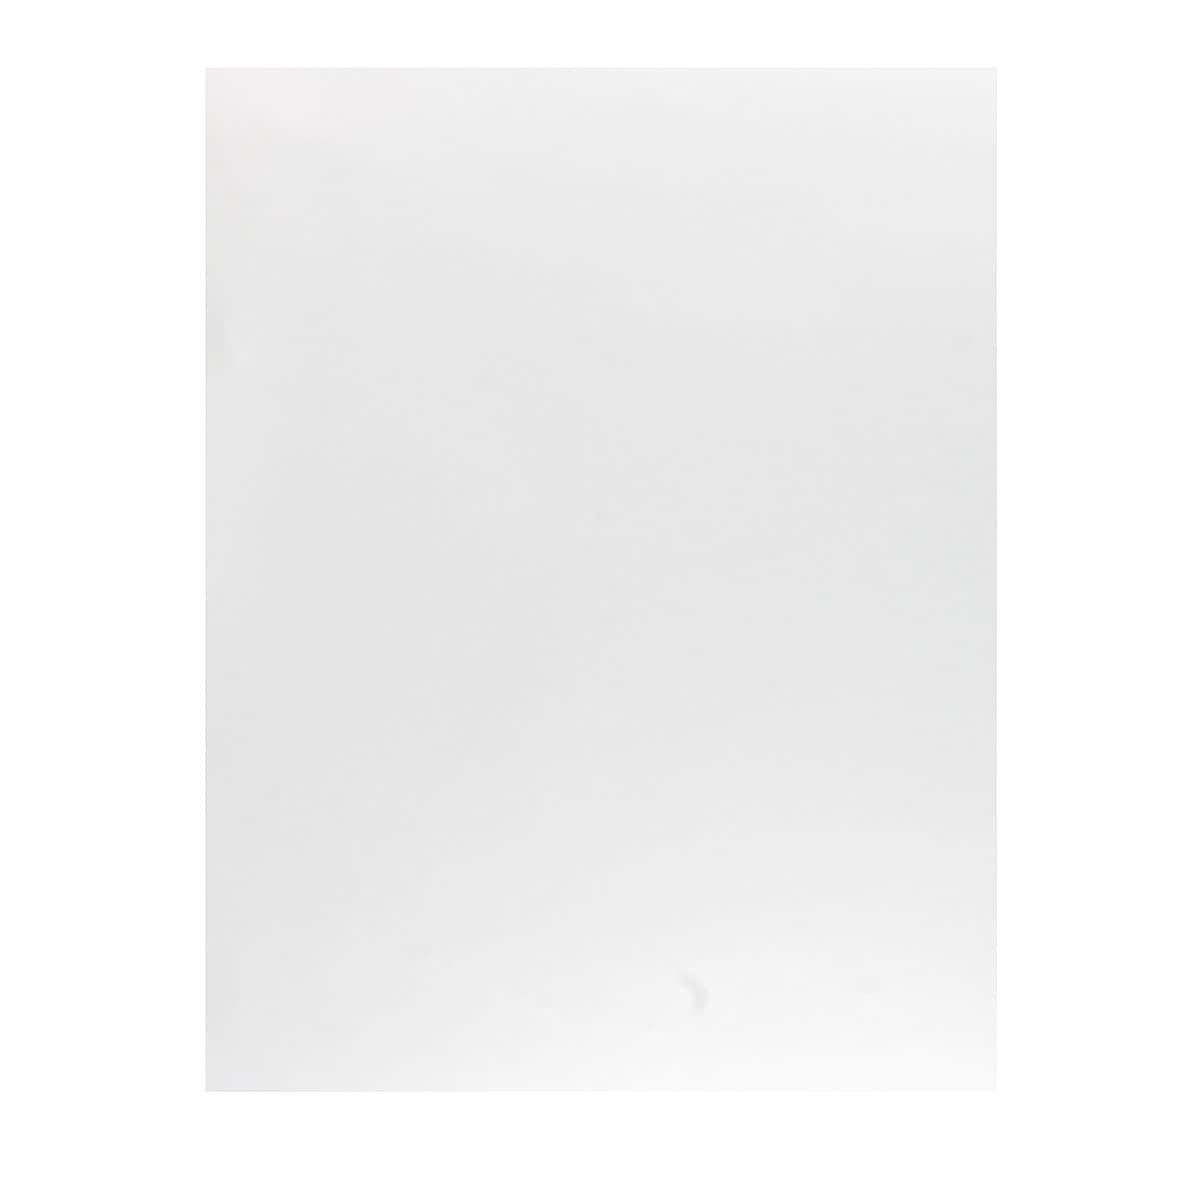 Poster Board, White Poster Paper 11x14, White Poster Board, Poster Board Bulk, Posteboard, School Supplies, (100 Pack)